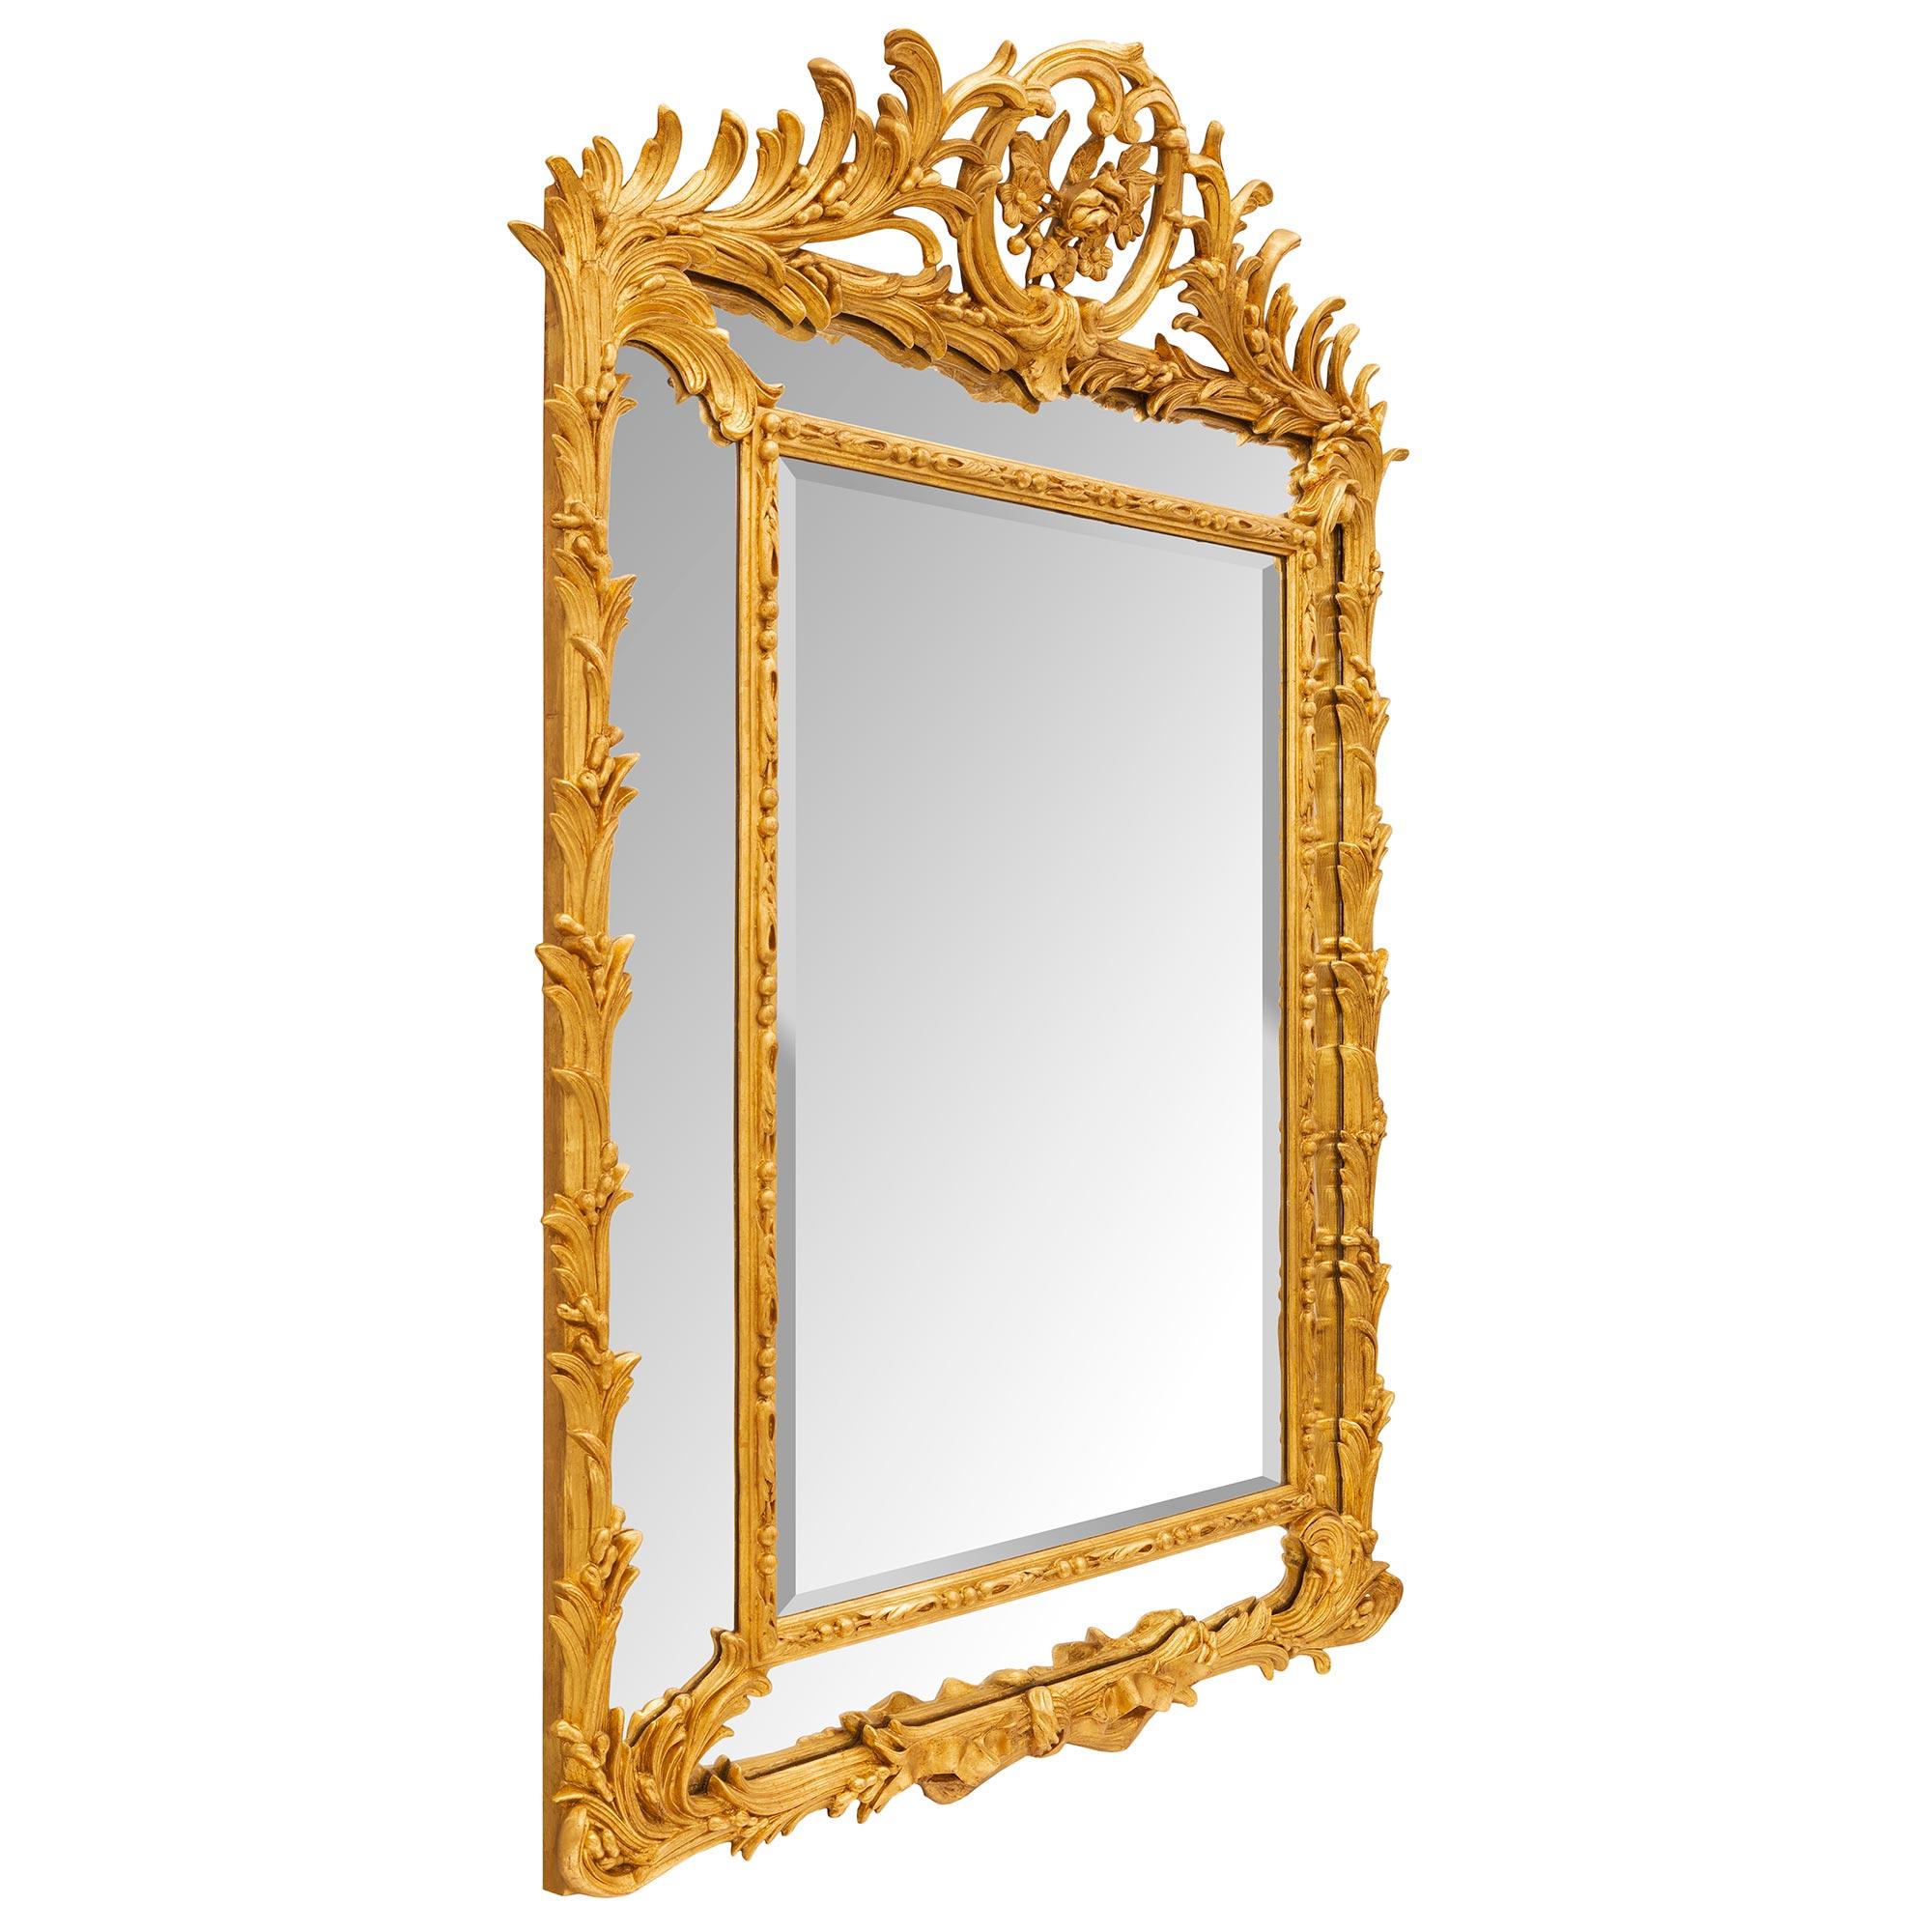 An exceptional French 19th century Louis XVI st. double framed giltwood mirror. The mirror retains all of its original mirror plates throughout with the central beveled mirror plate framed within an elegant beaded and laurel leaf border. Stunning